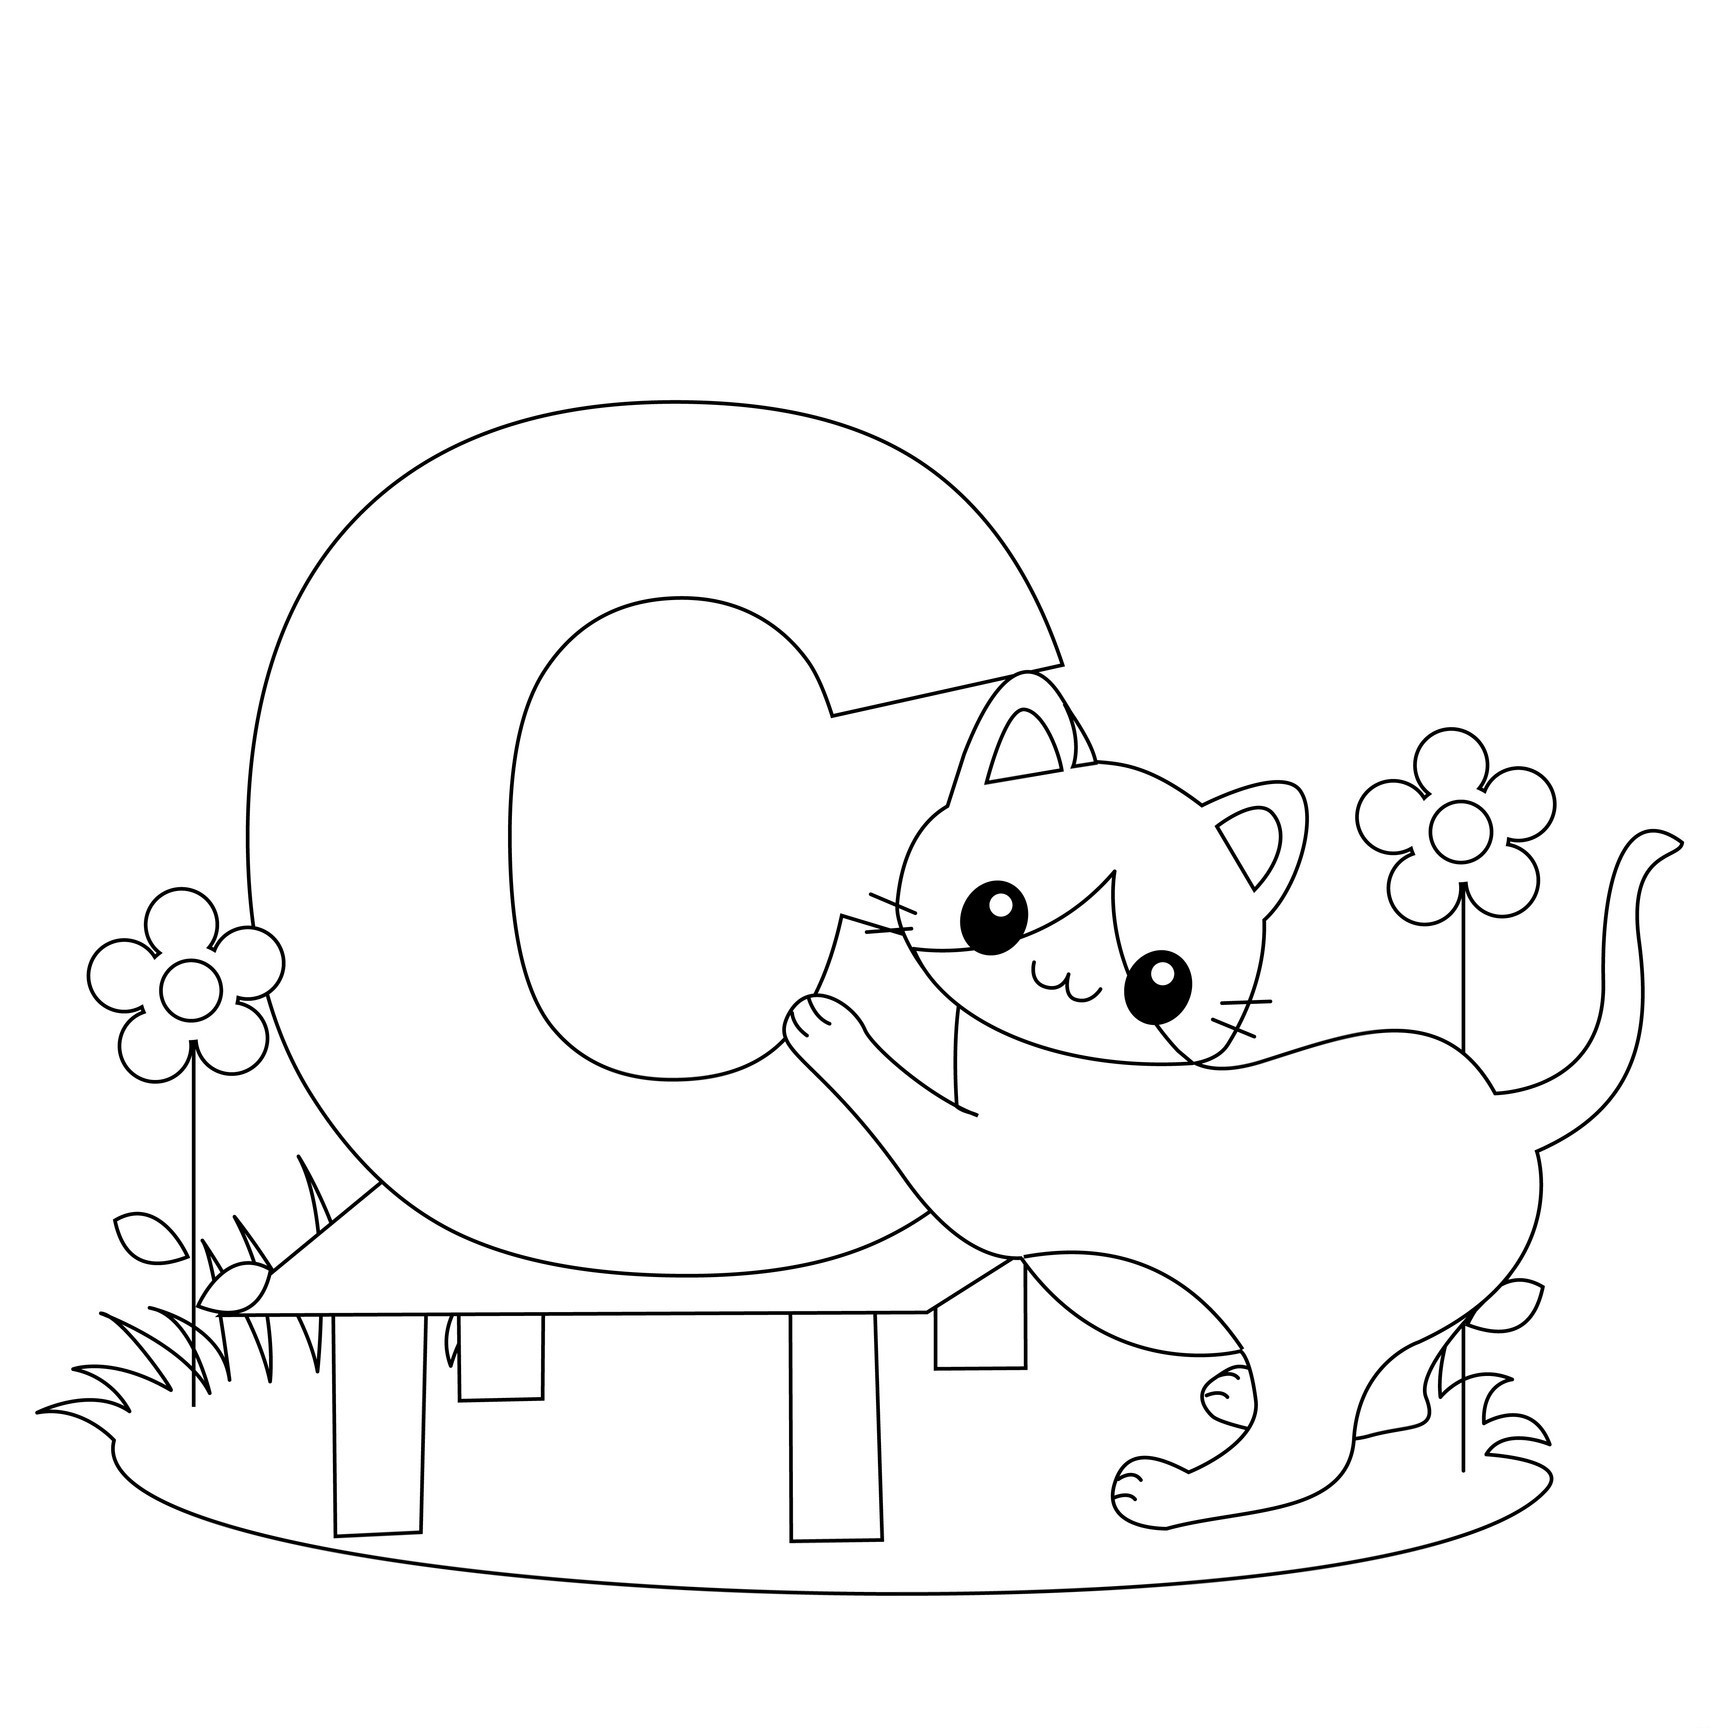 Letter C Coloring Pages For Toddlers
 Free Printable Alphabet Coloring Pages for Kids Best